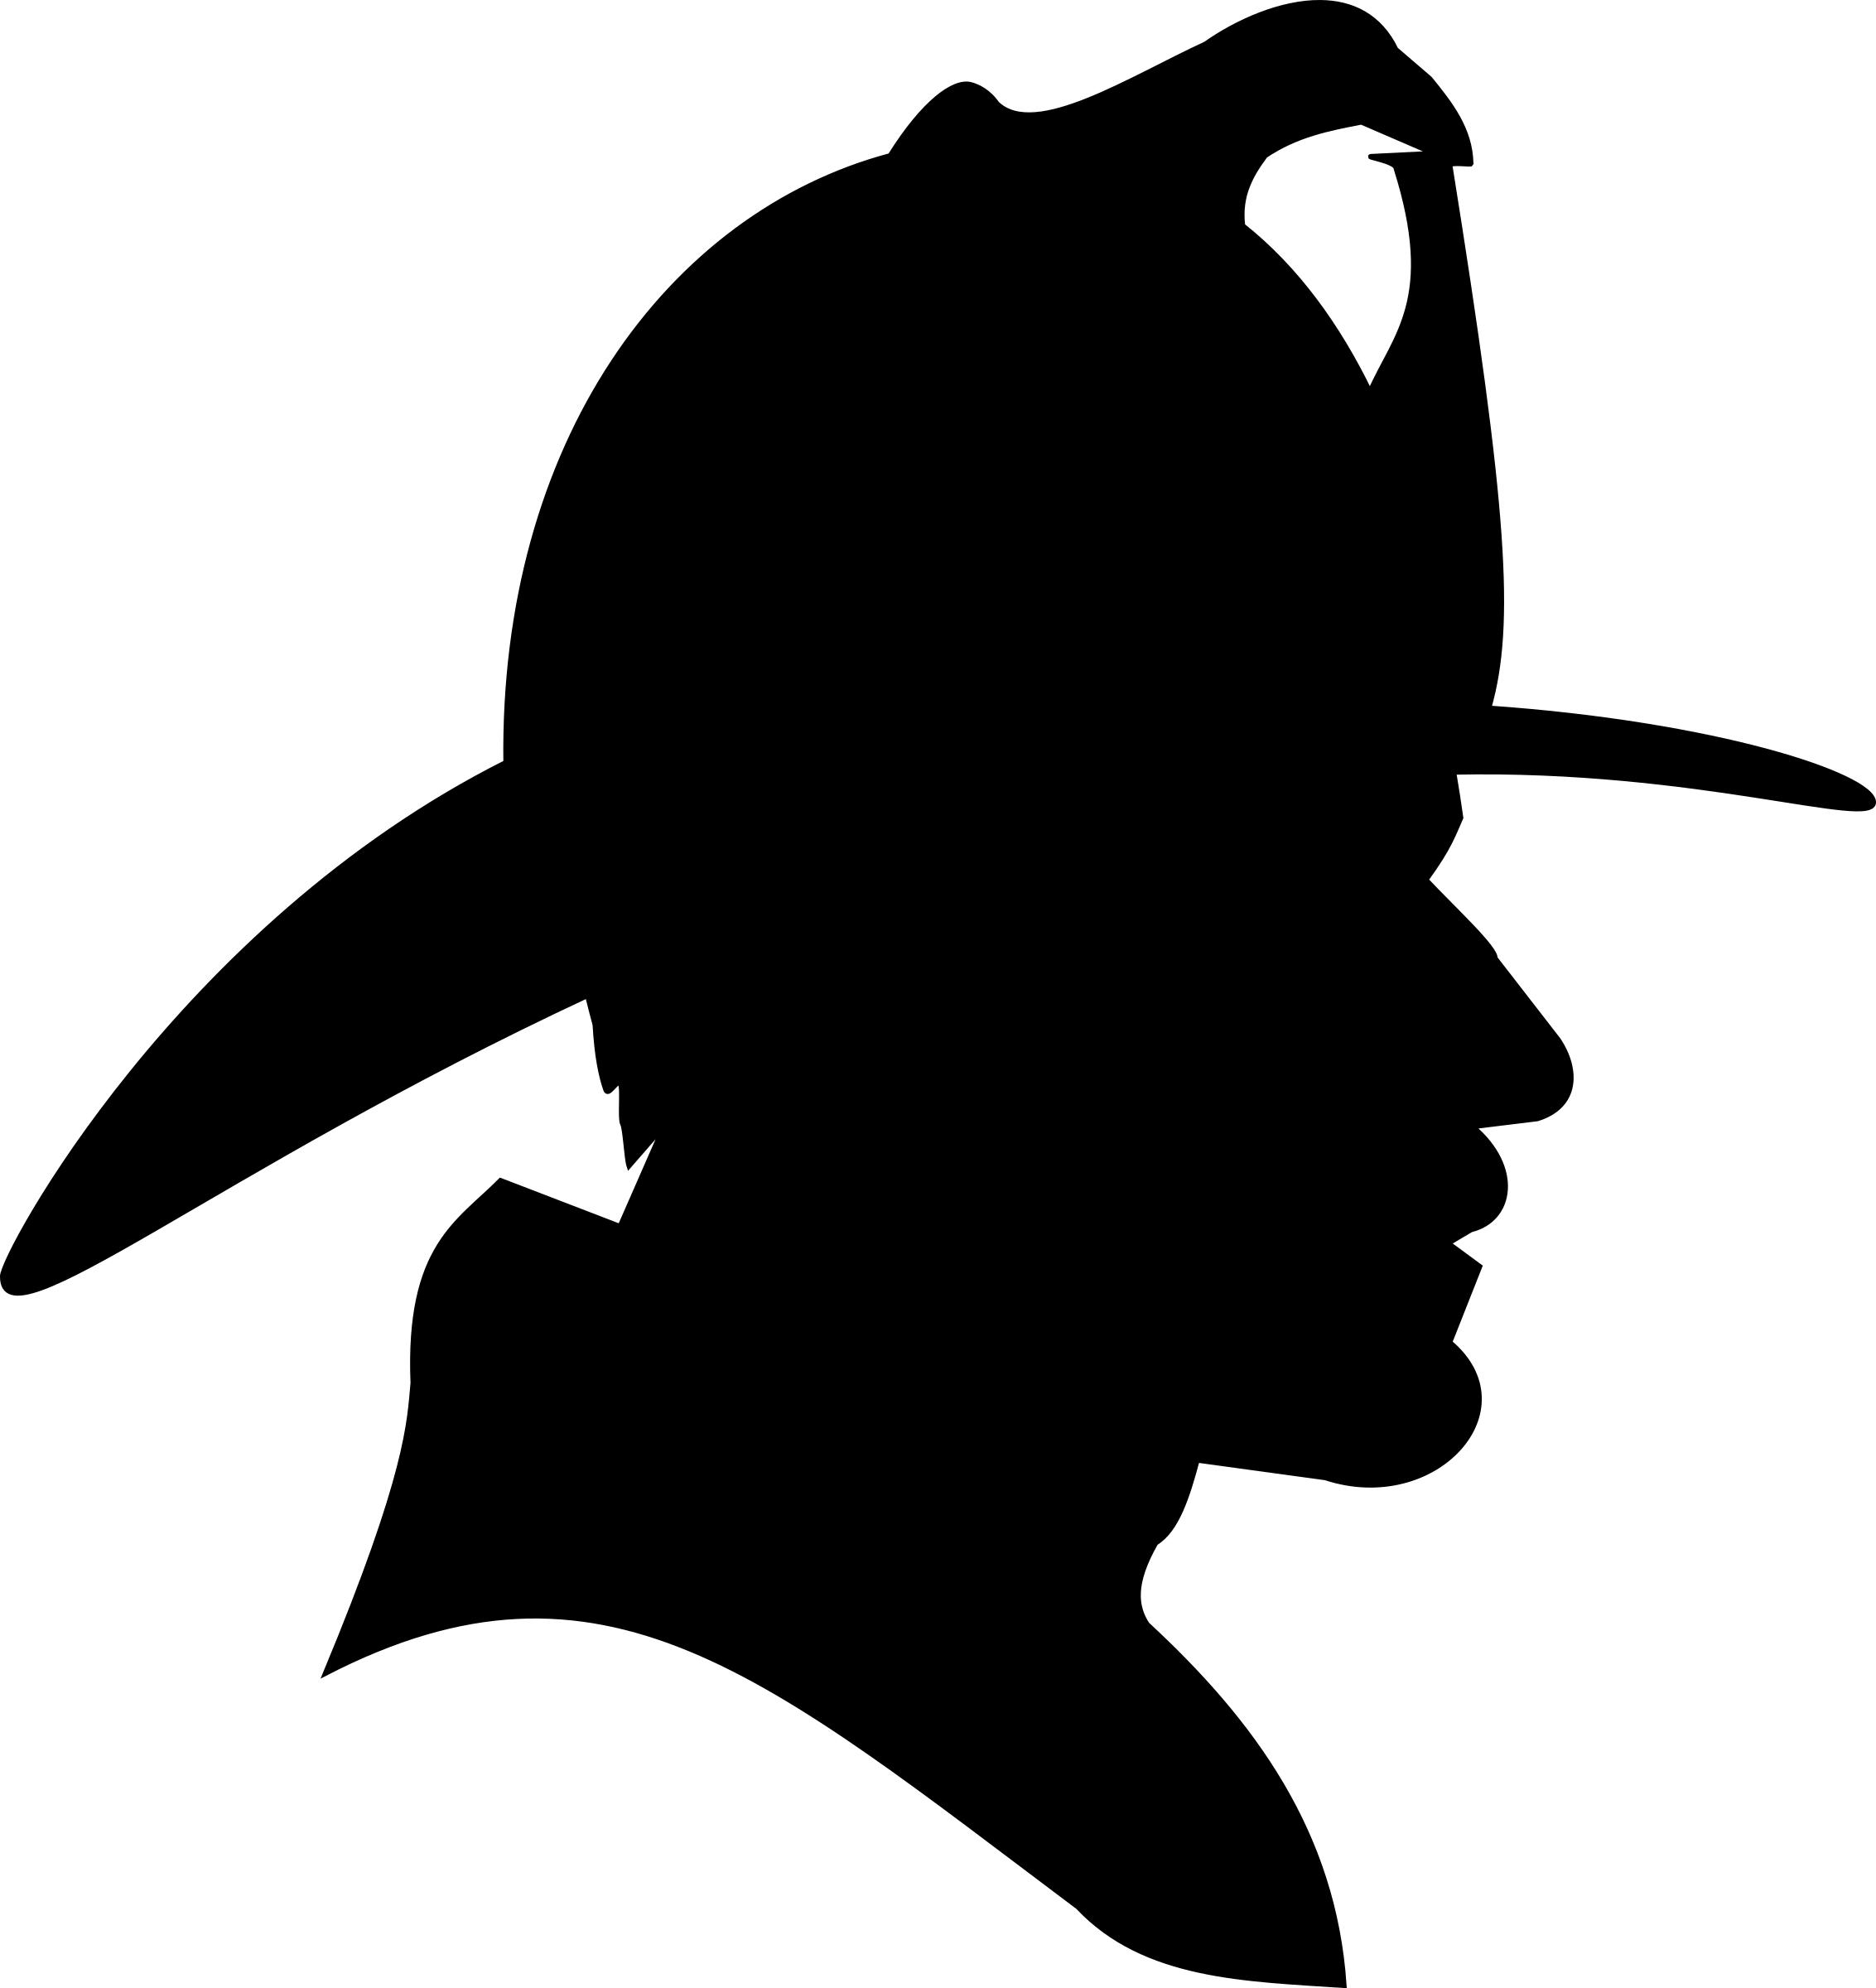 Firefighter Profile Silhouette PNG icons